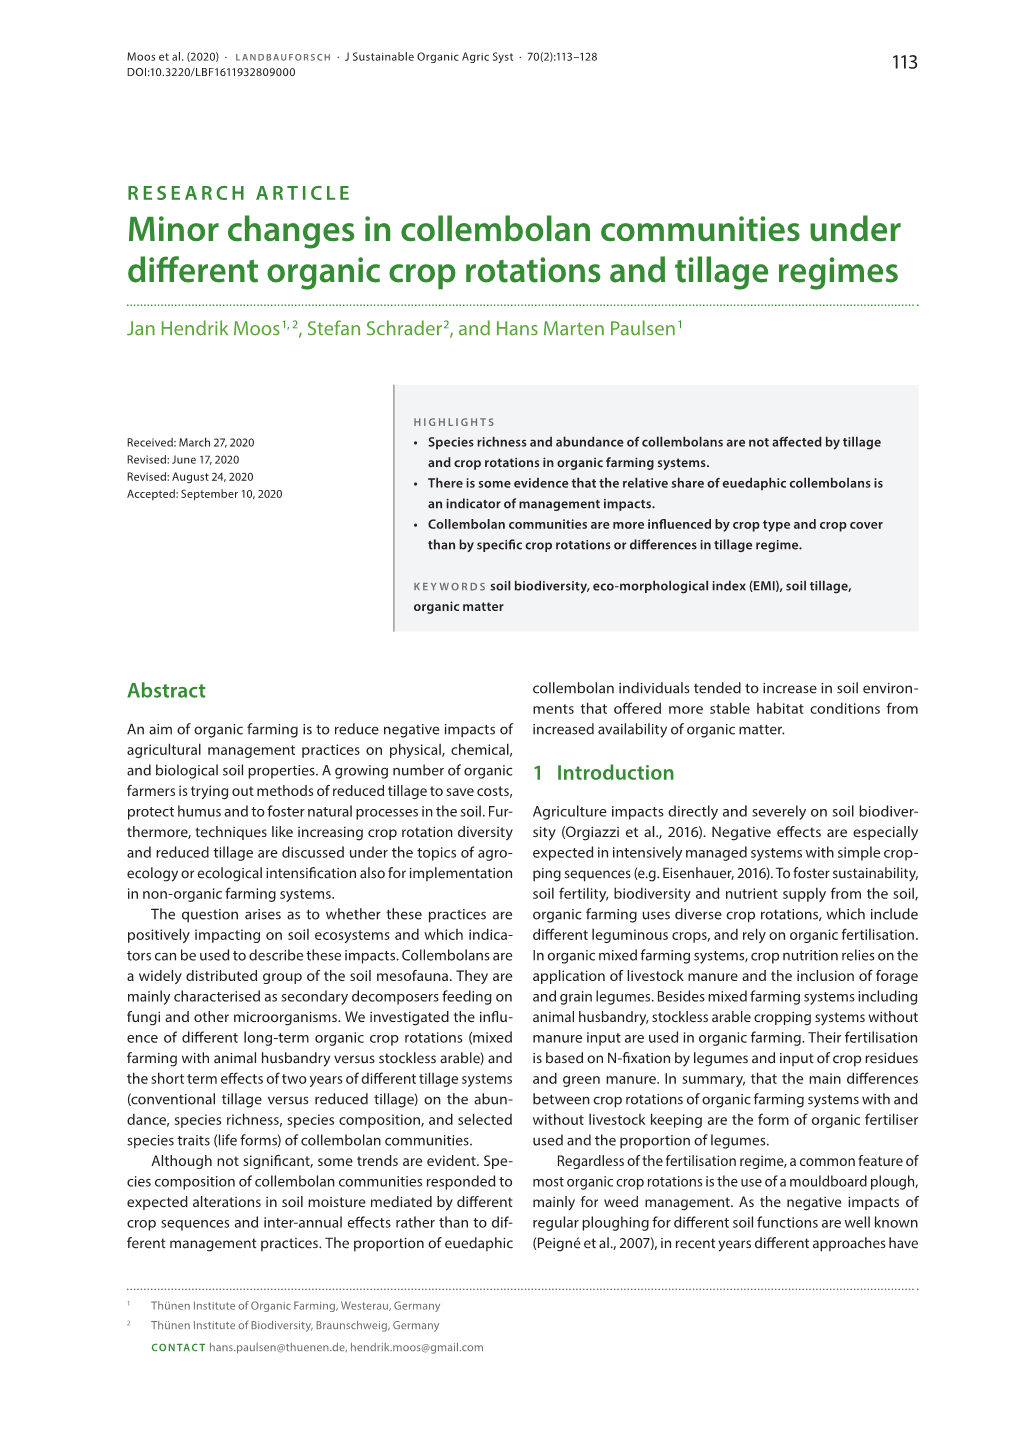 Minor Changes in Collembolan Communities Under Different Organic Crop Rotations and Tillage Regimes